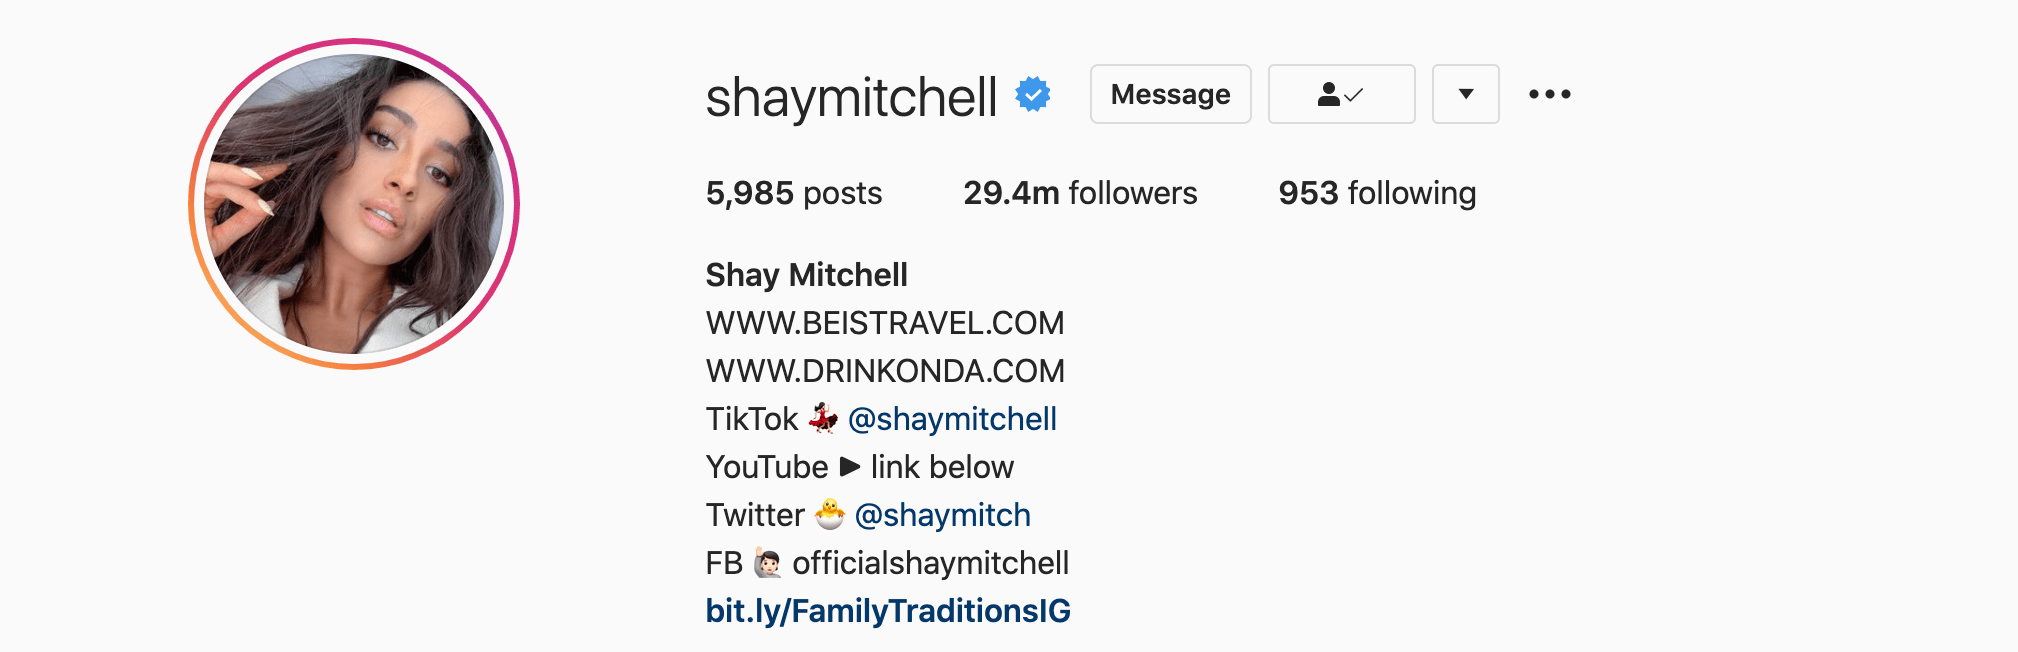 Top Instagram Influencers - SHAY MITCHELL